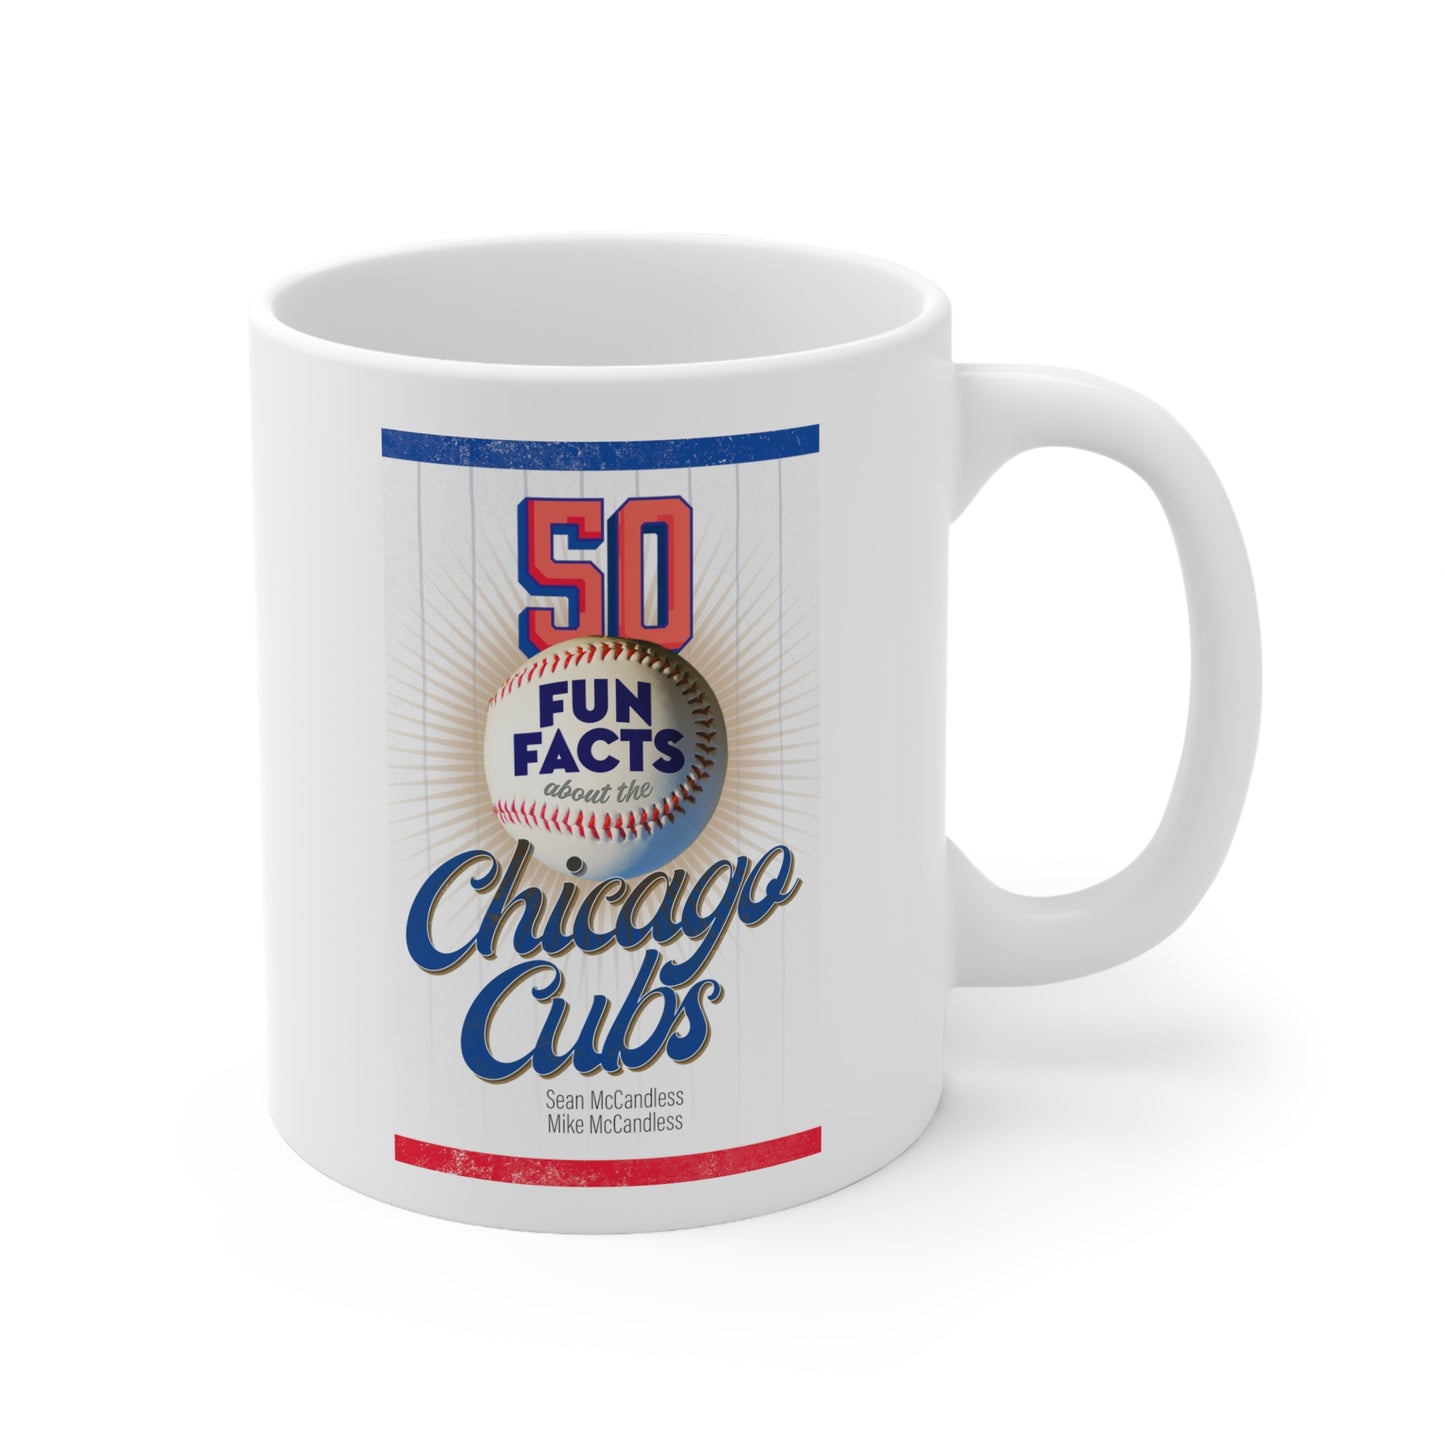 50 Fun Facts About the Chicago Cubs Mug